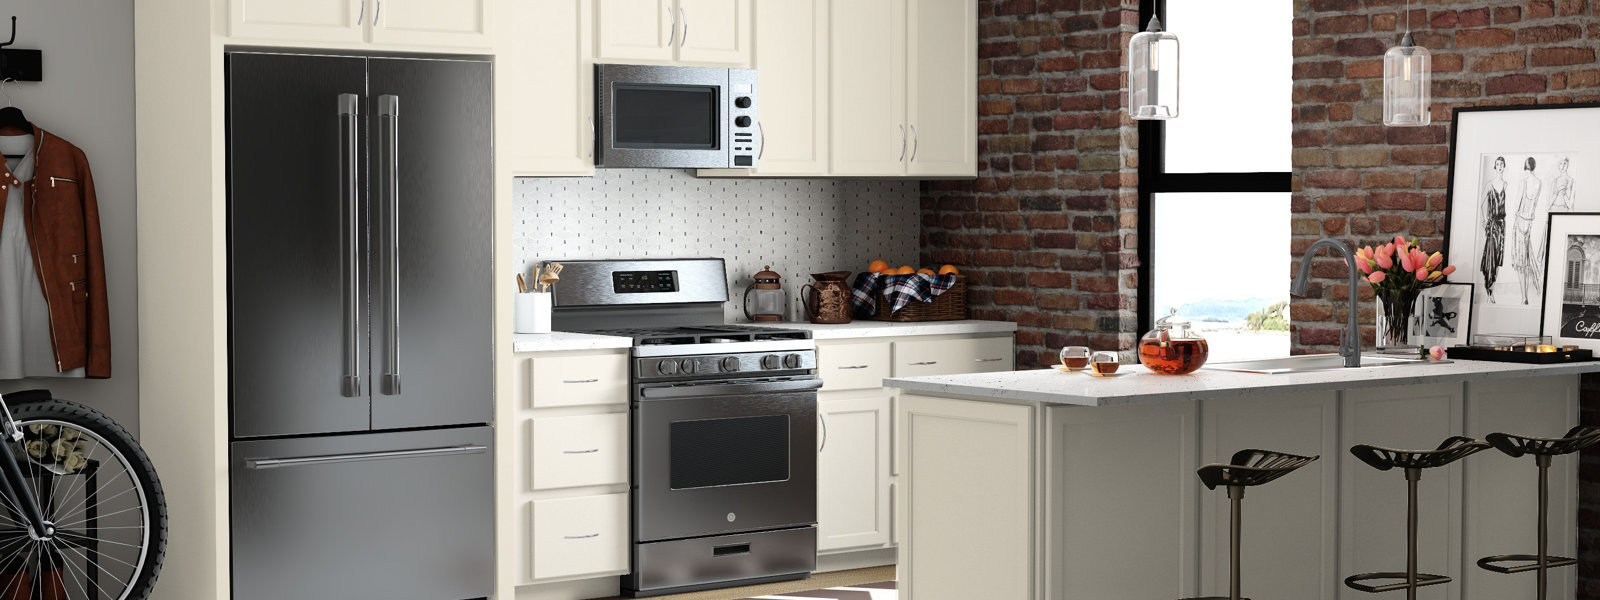 Colorful appliances may be the next trend: Check out these options at  Wayfair, Home Depot and more 